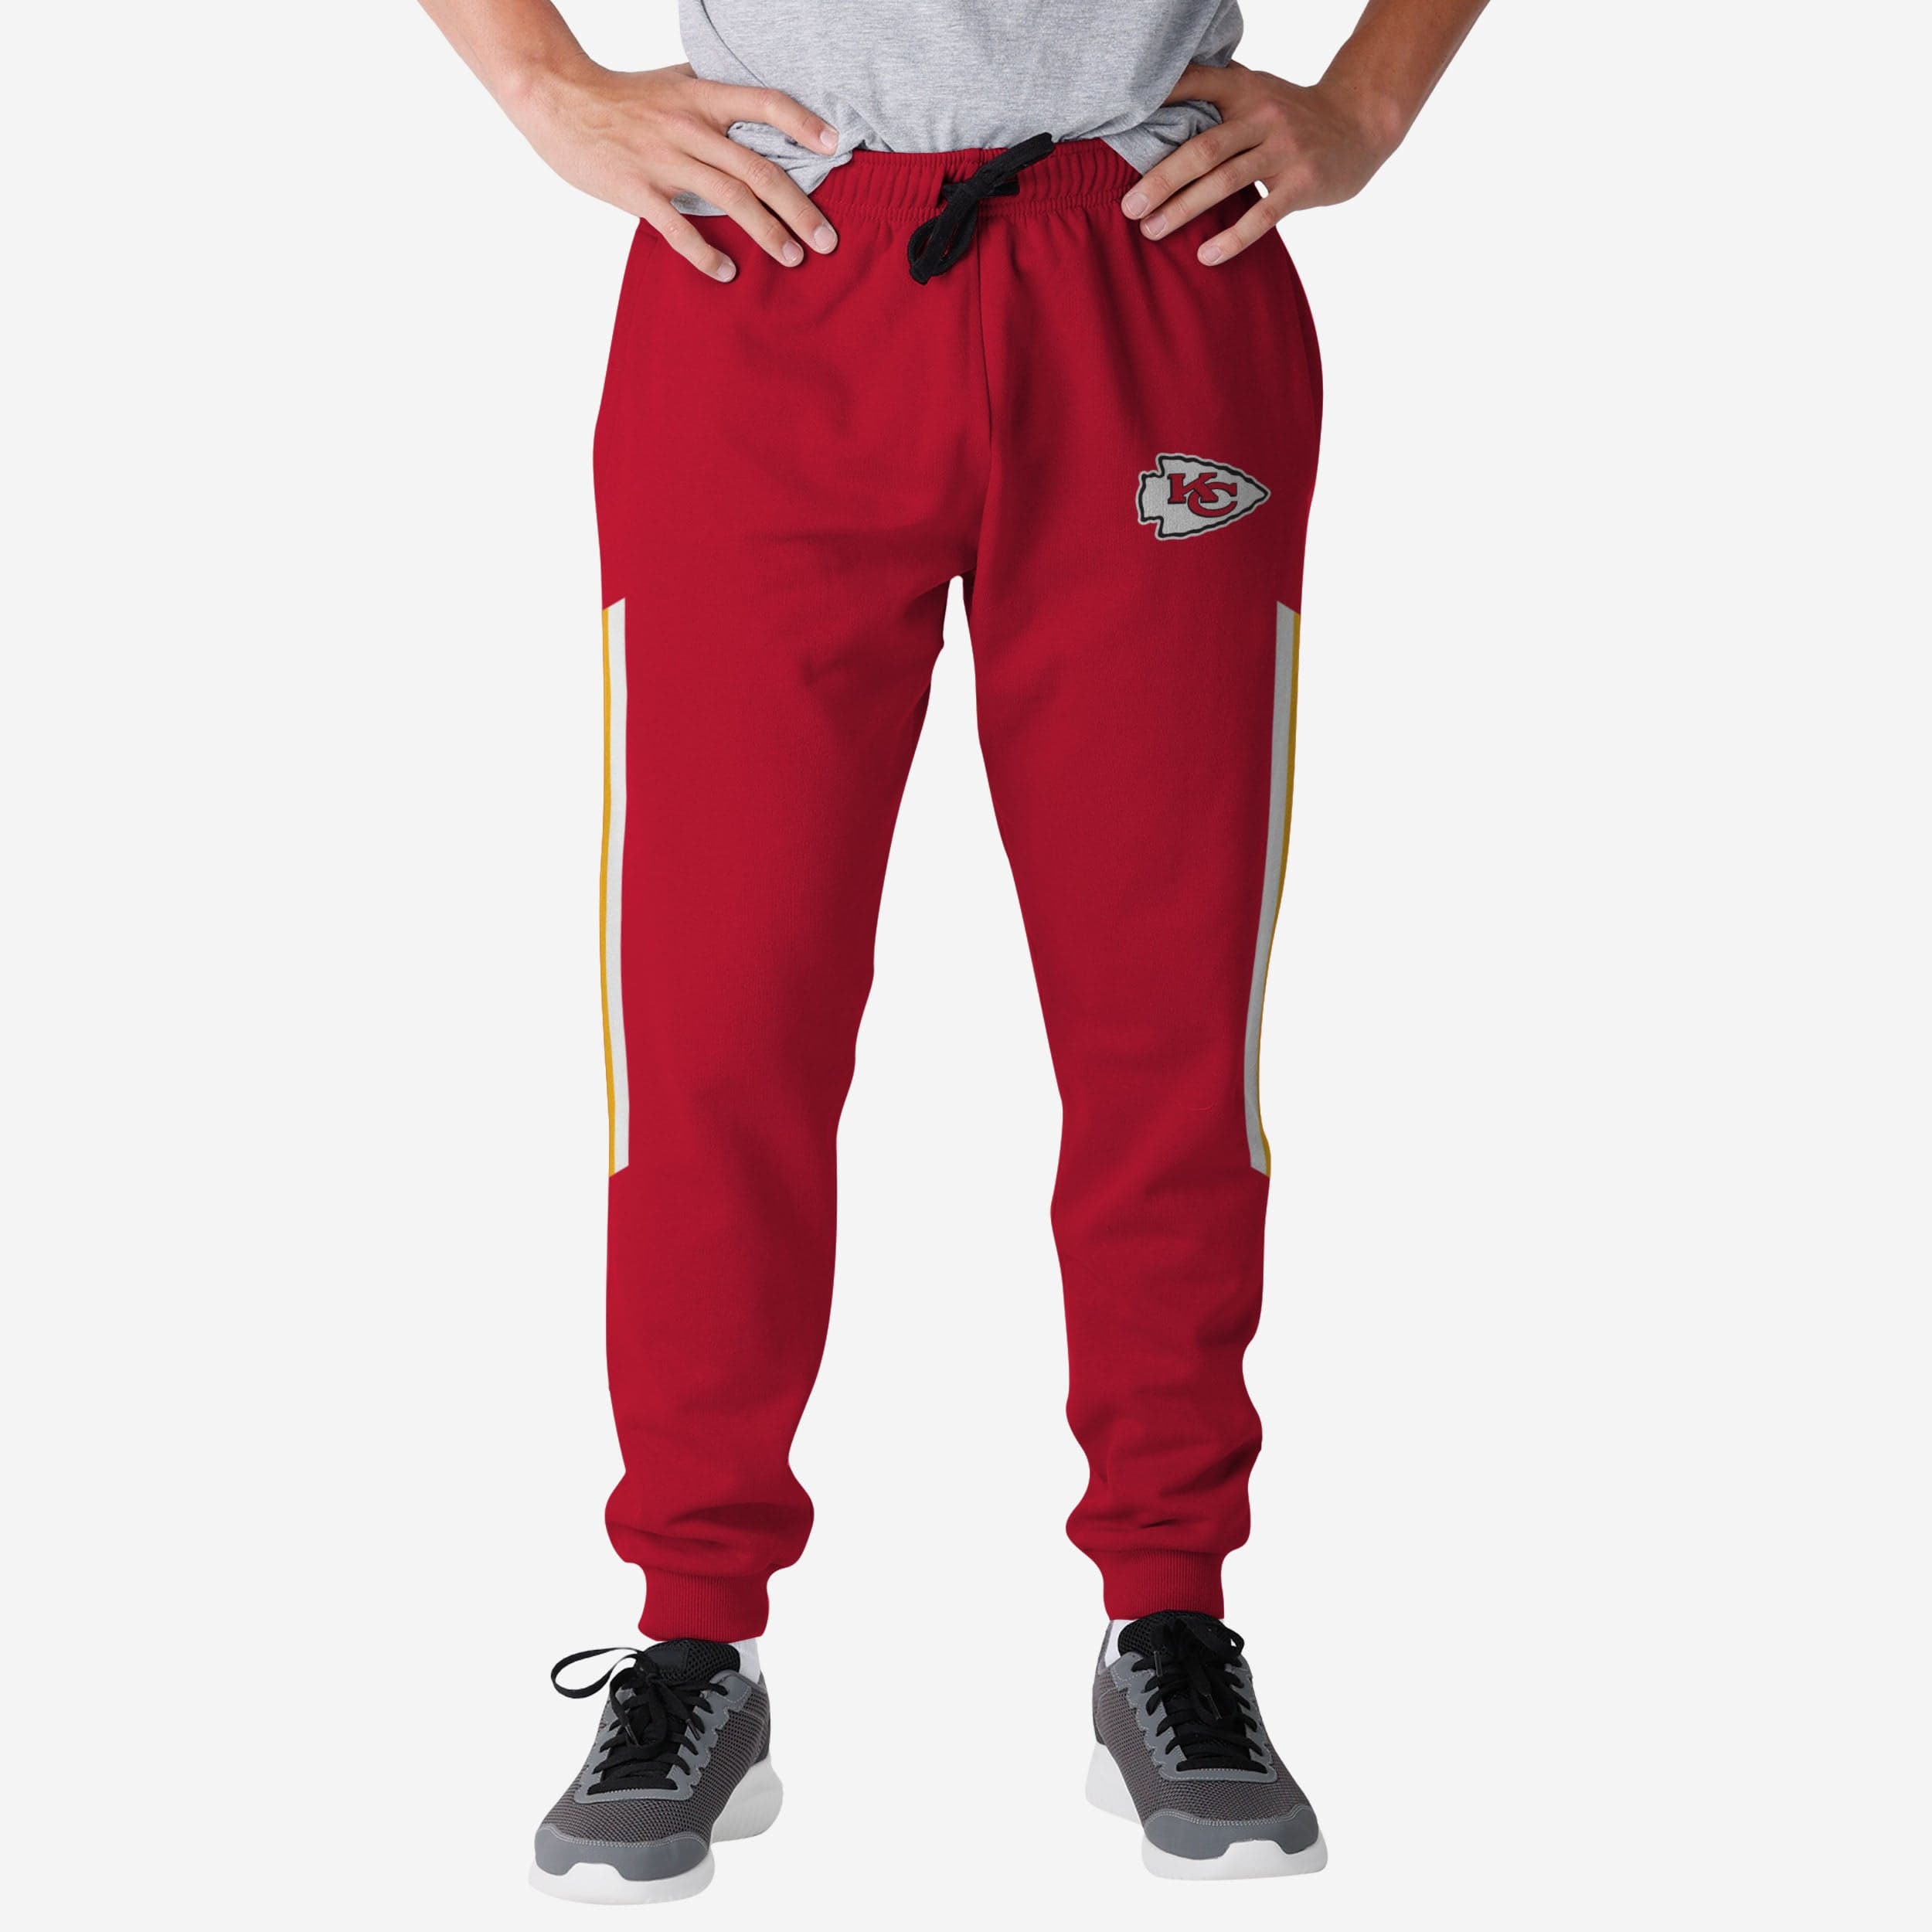 Chicago Bulls Courtside City Edition Women's Nike NBA Tracksuit Bottoms.  Nike IL